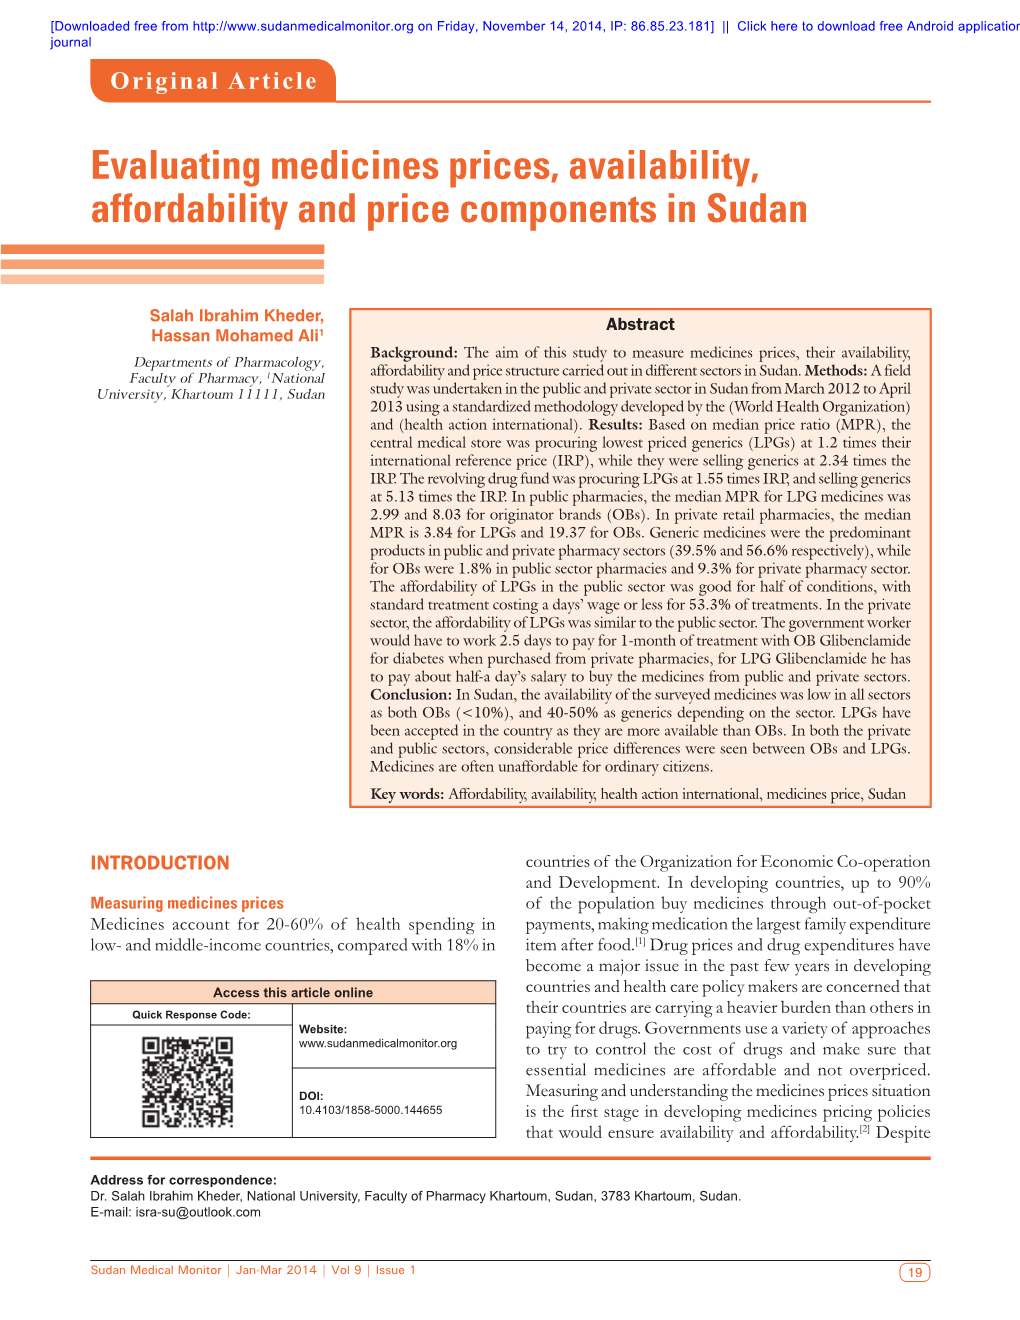 Evaluating Medicines Prices, Availability, Affordability and Price Components in Sudan